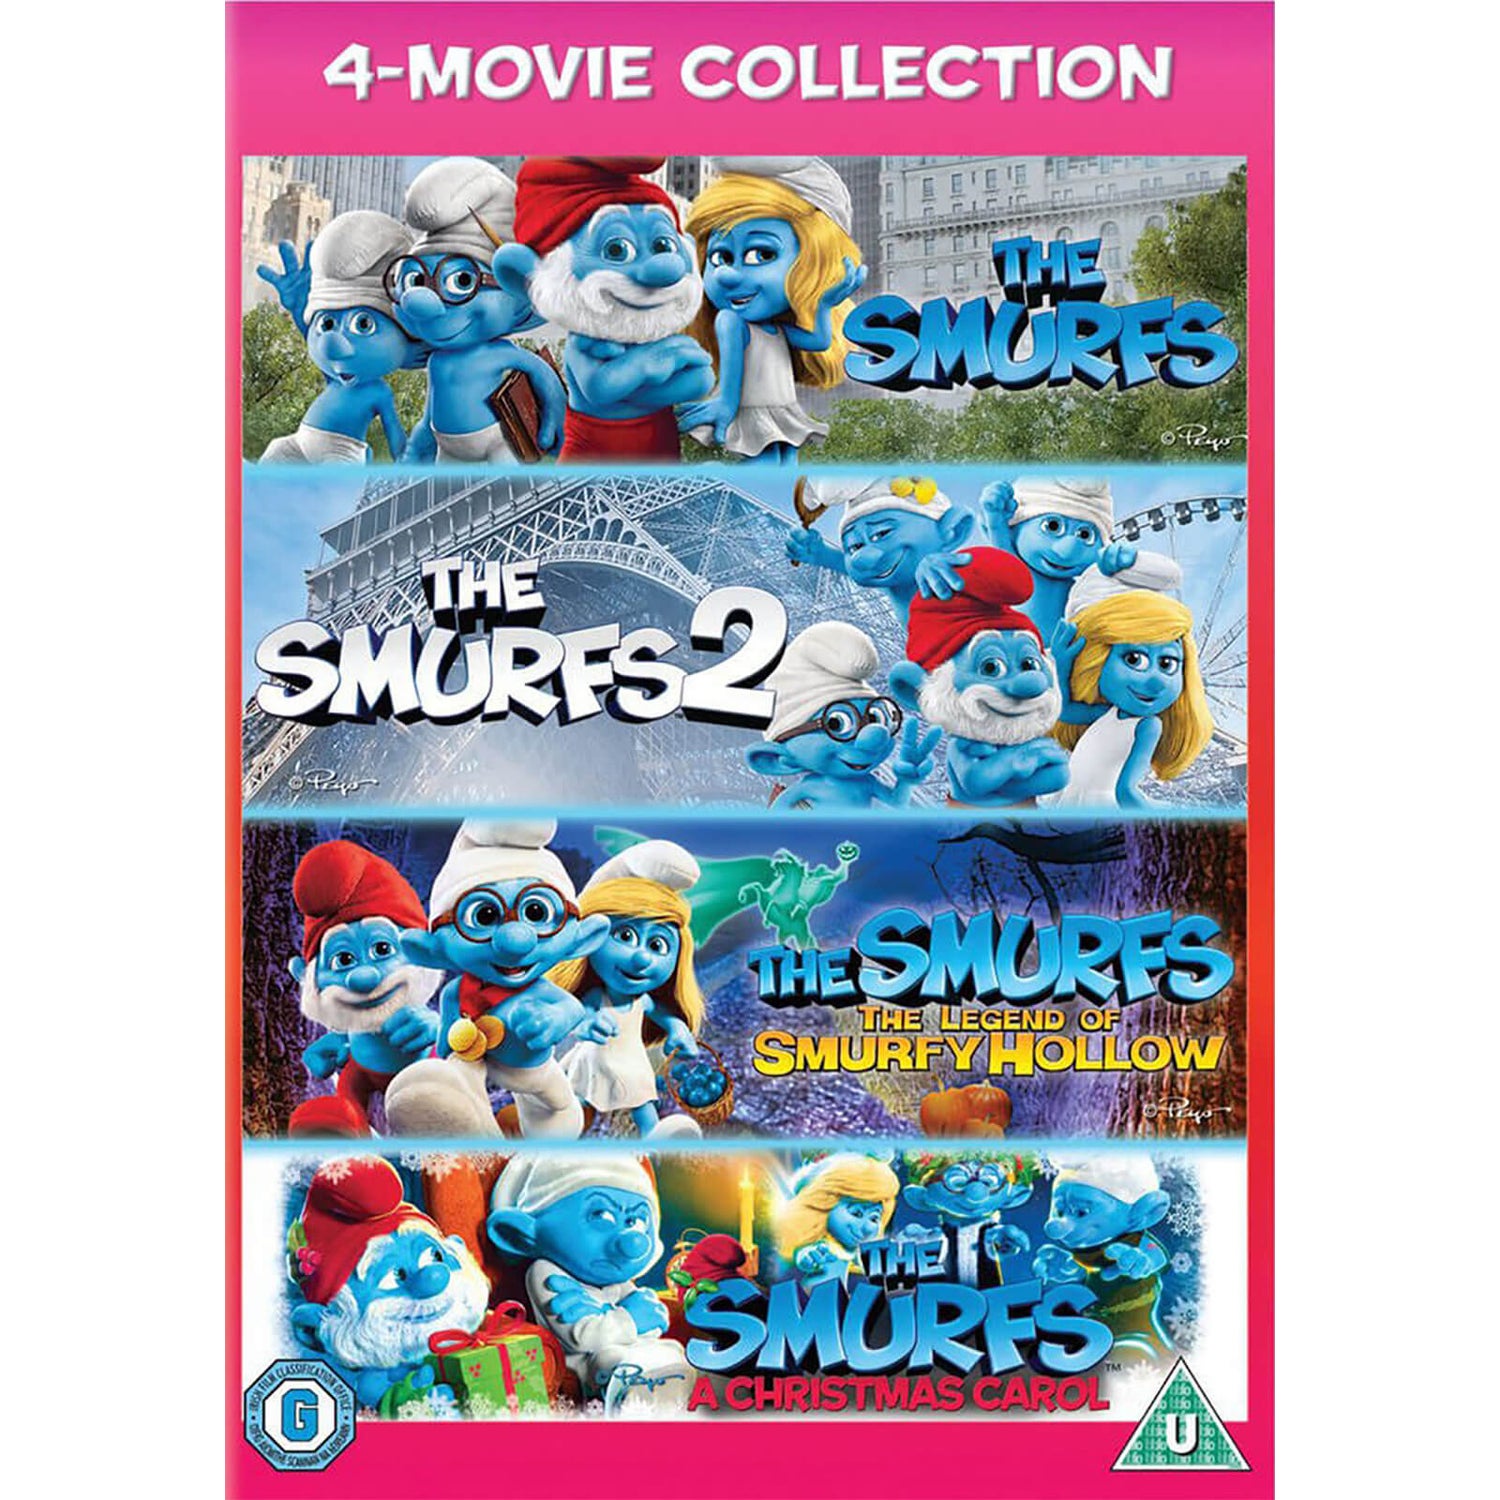 The Ultimate Smurfs Collection